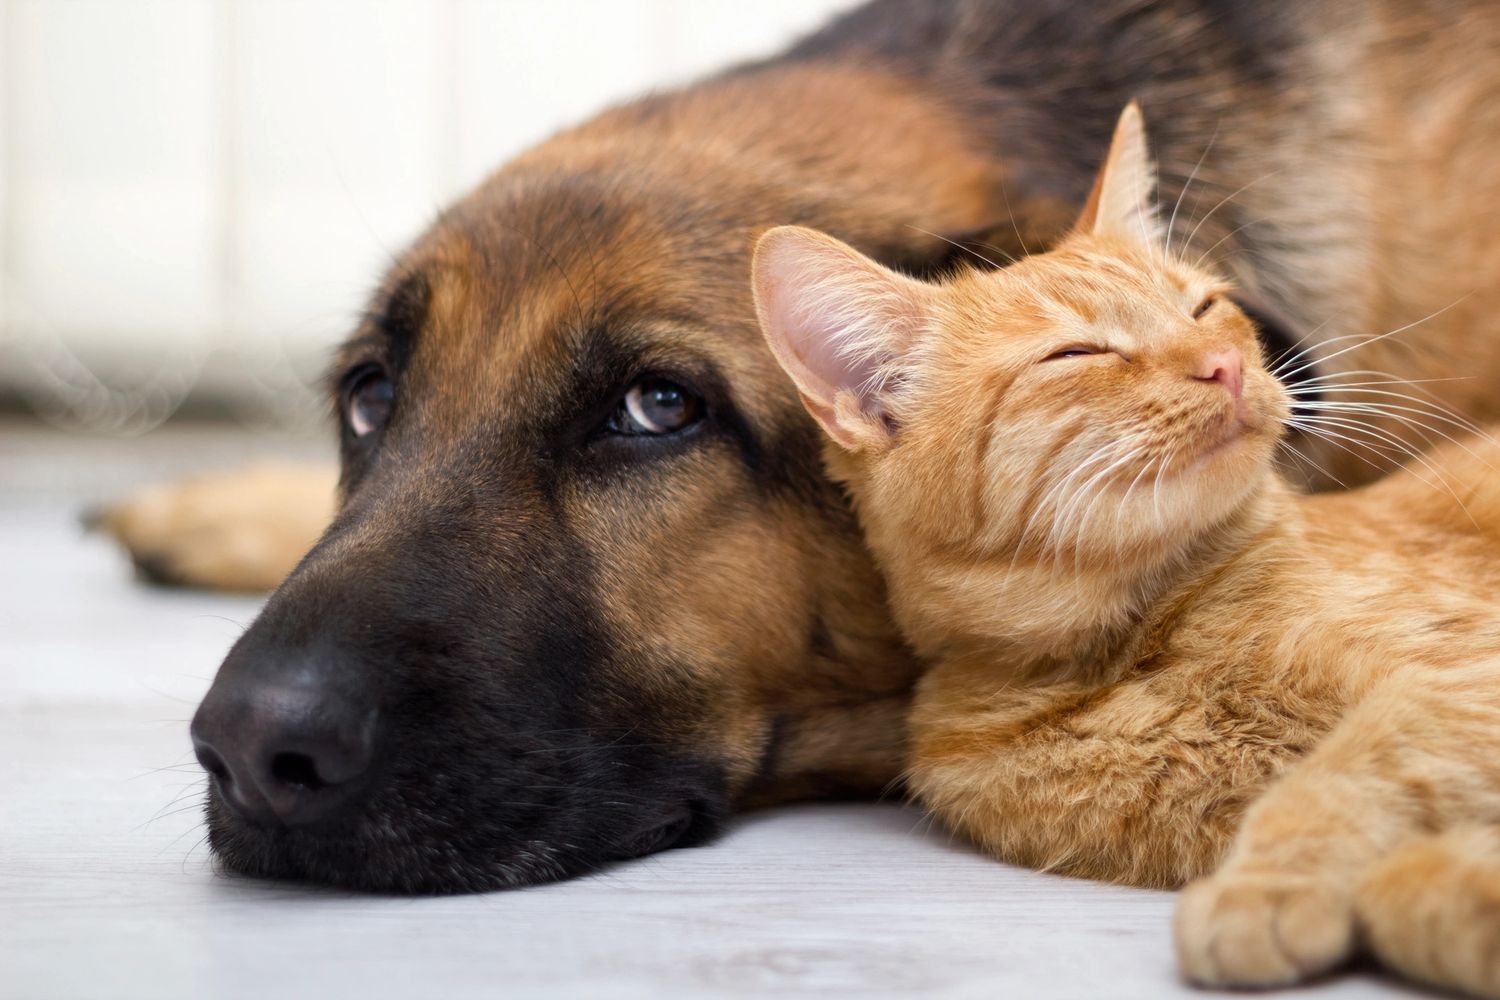 Let us care for your furry family members